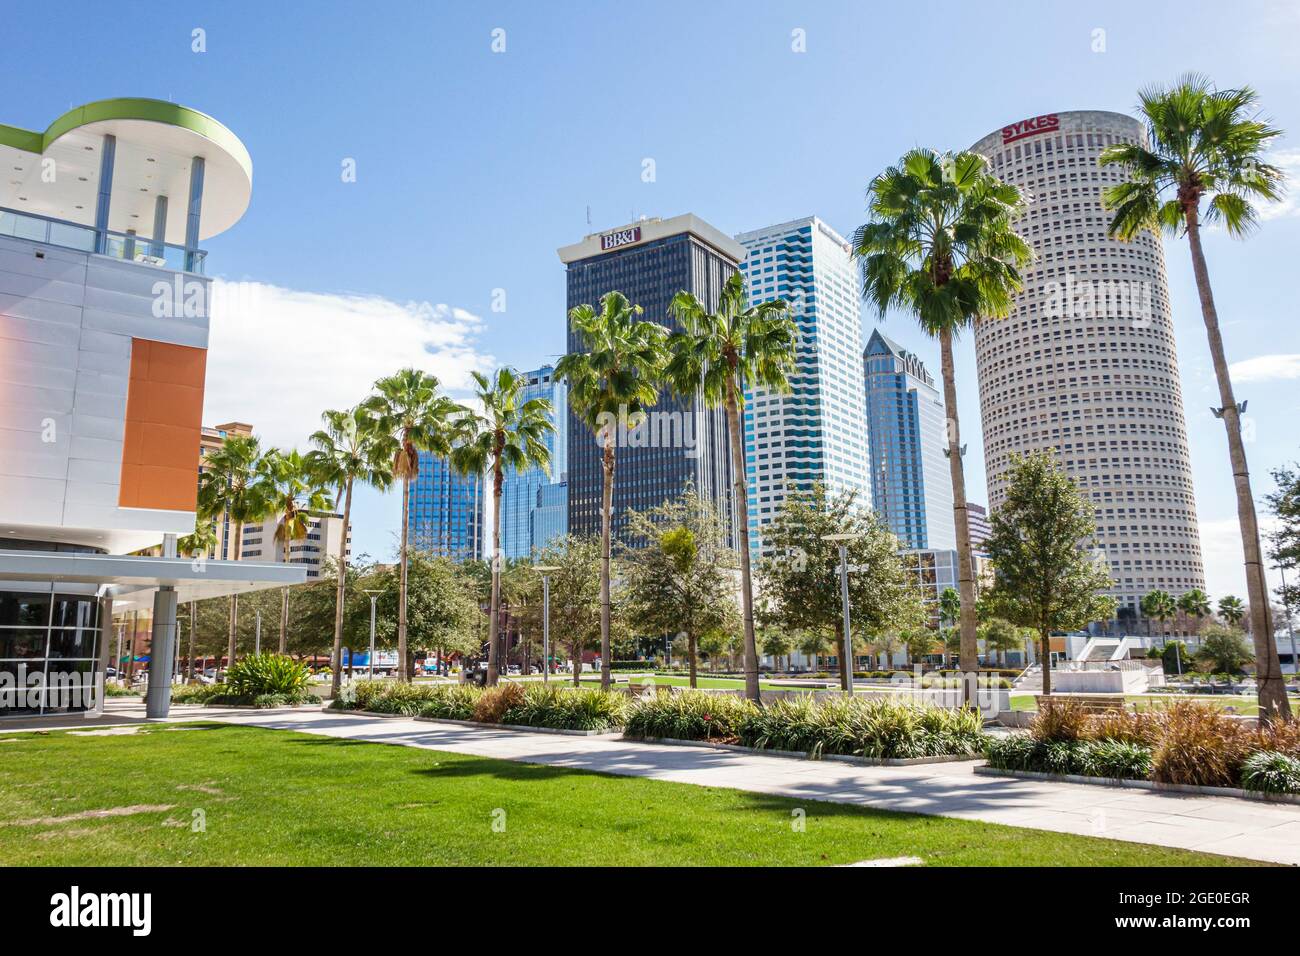 Florida Tampa Waterfront Arts District,Glazer Children's Museum Curtis Hixon Waterfront Park,city skyline skyscrapers high rise buildings, Stock Photo